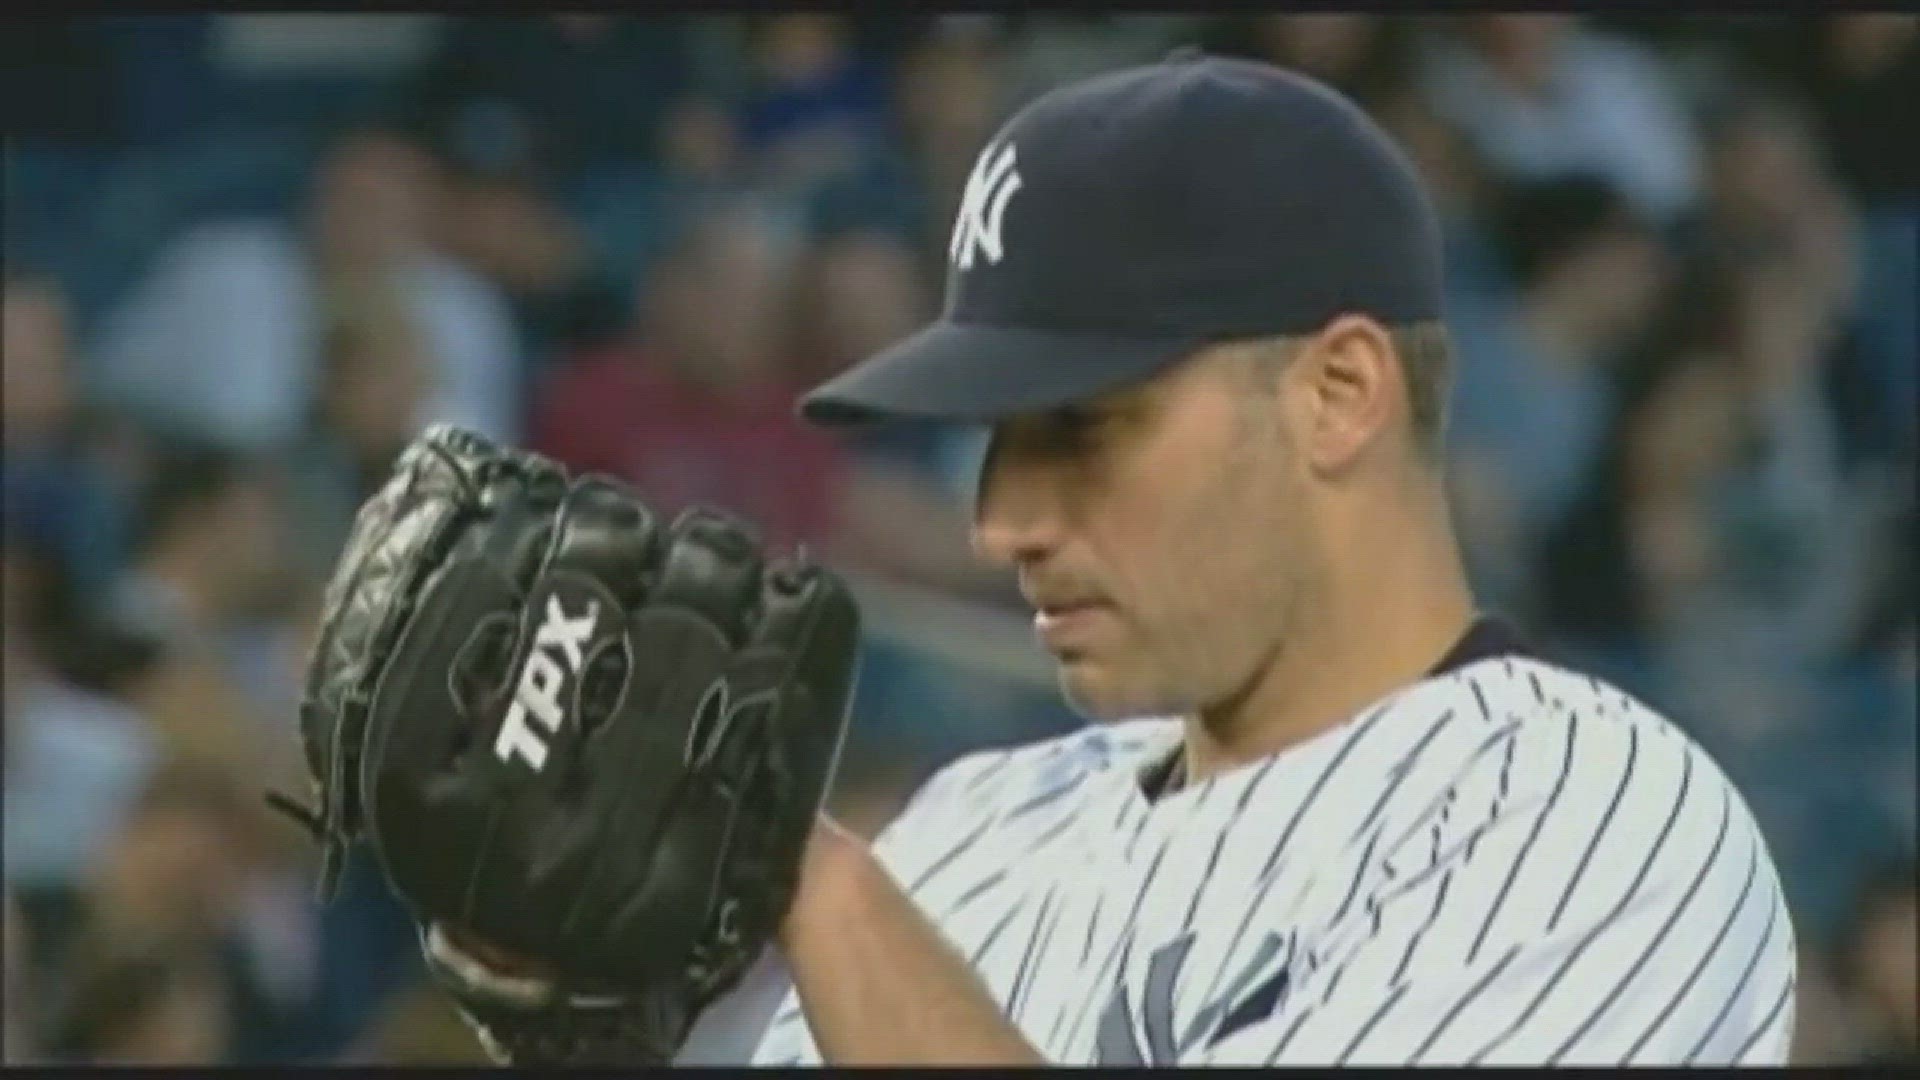 Andy Pettitte finds a new home at Second Baptist